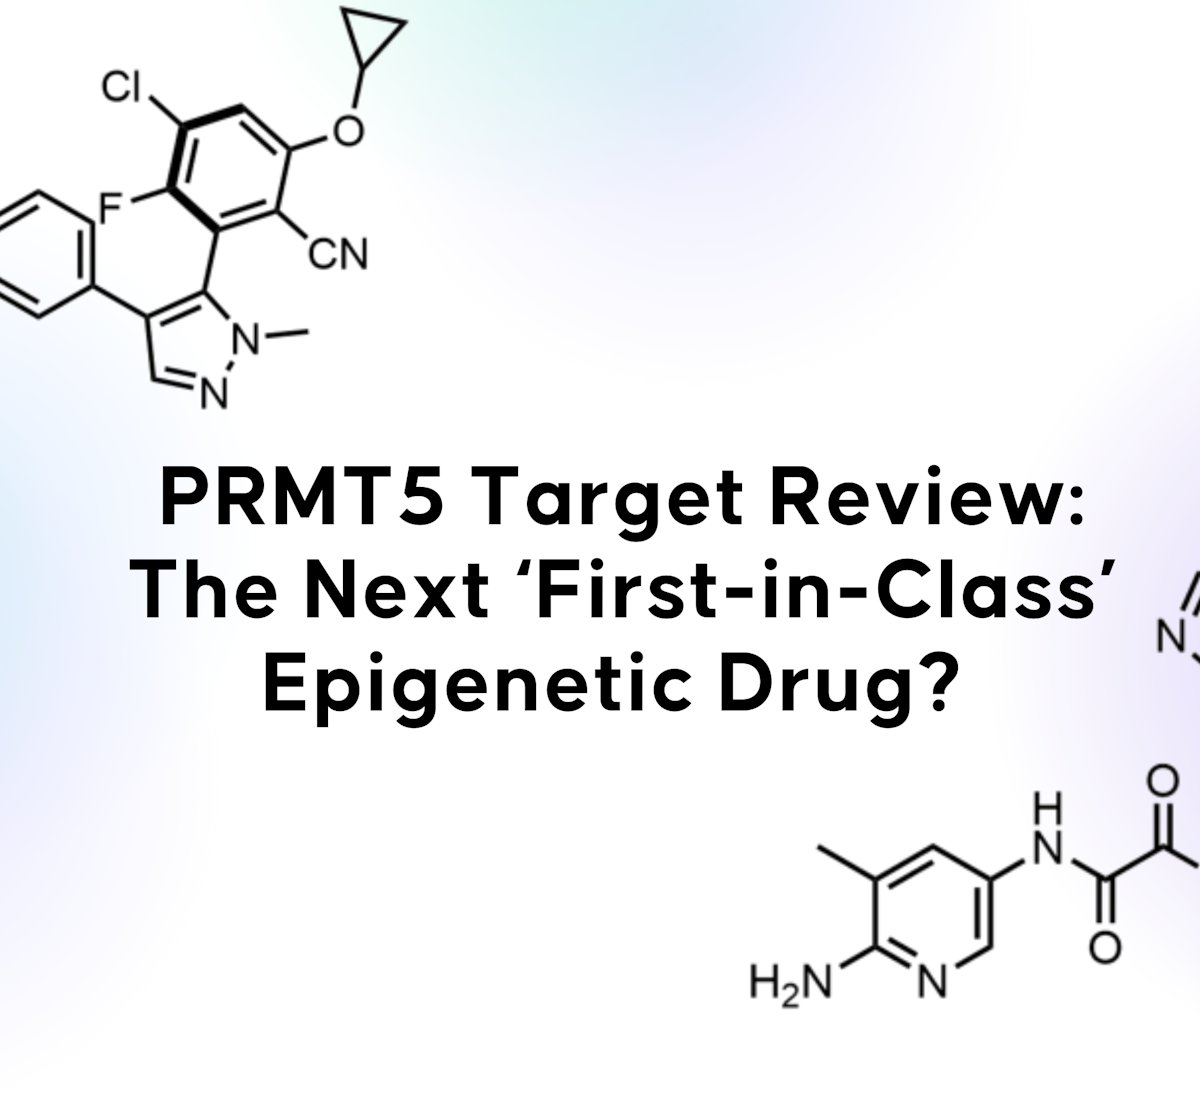 PRMT5 Target Review: The Next ‘First-in-Class’ Epigenetic Drug | drughunters.com/3JWq2AO

Learn more about PRMT5, the currently available data for compounds in clinical trials, how they differentiate, and what’s next in the field of PRMT5 inhibitors.